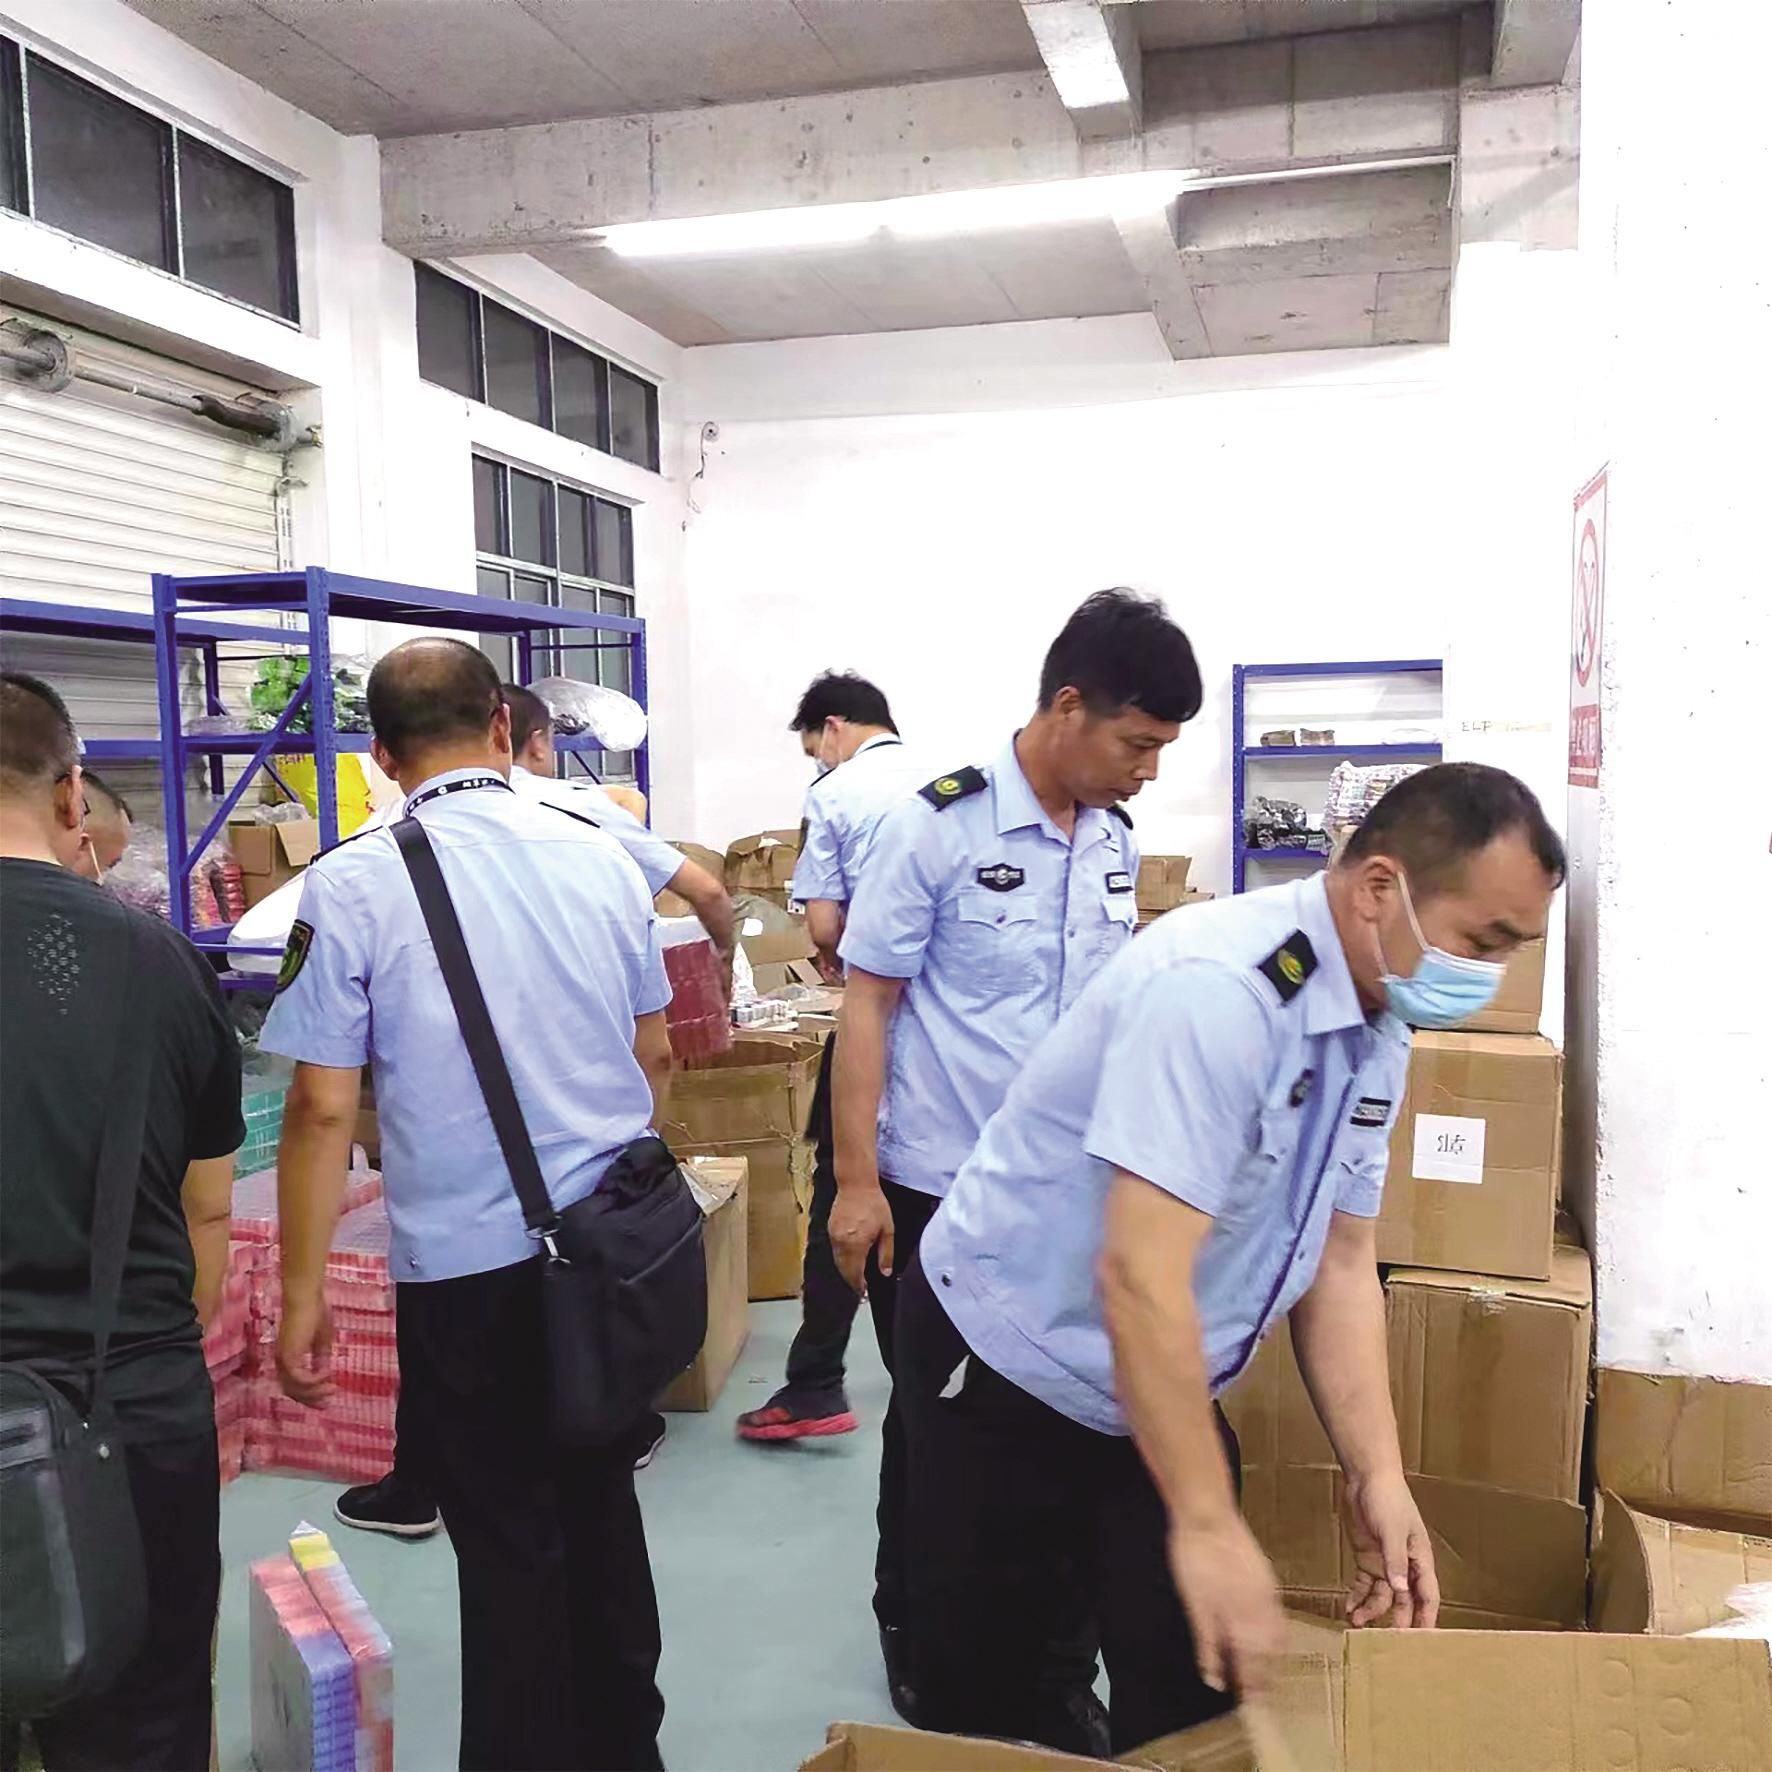 Hubei Tianmen Cracked a Huge Electronic Cigarette Counterfeiting Case, 23 People Were Arrested, Involving Nearly 300 Million Yuan